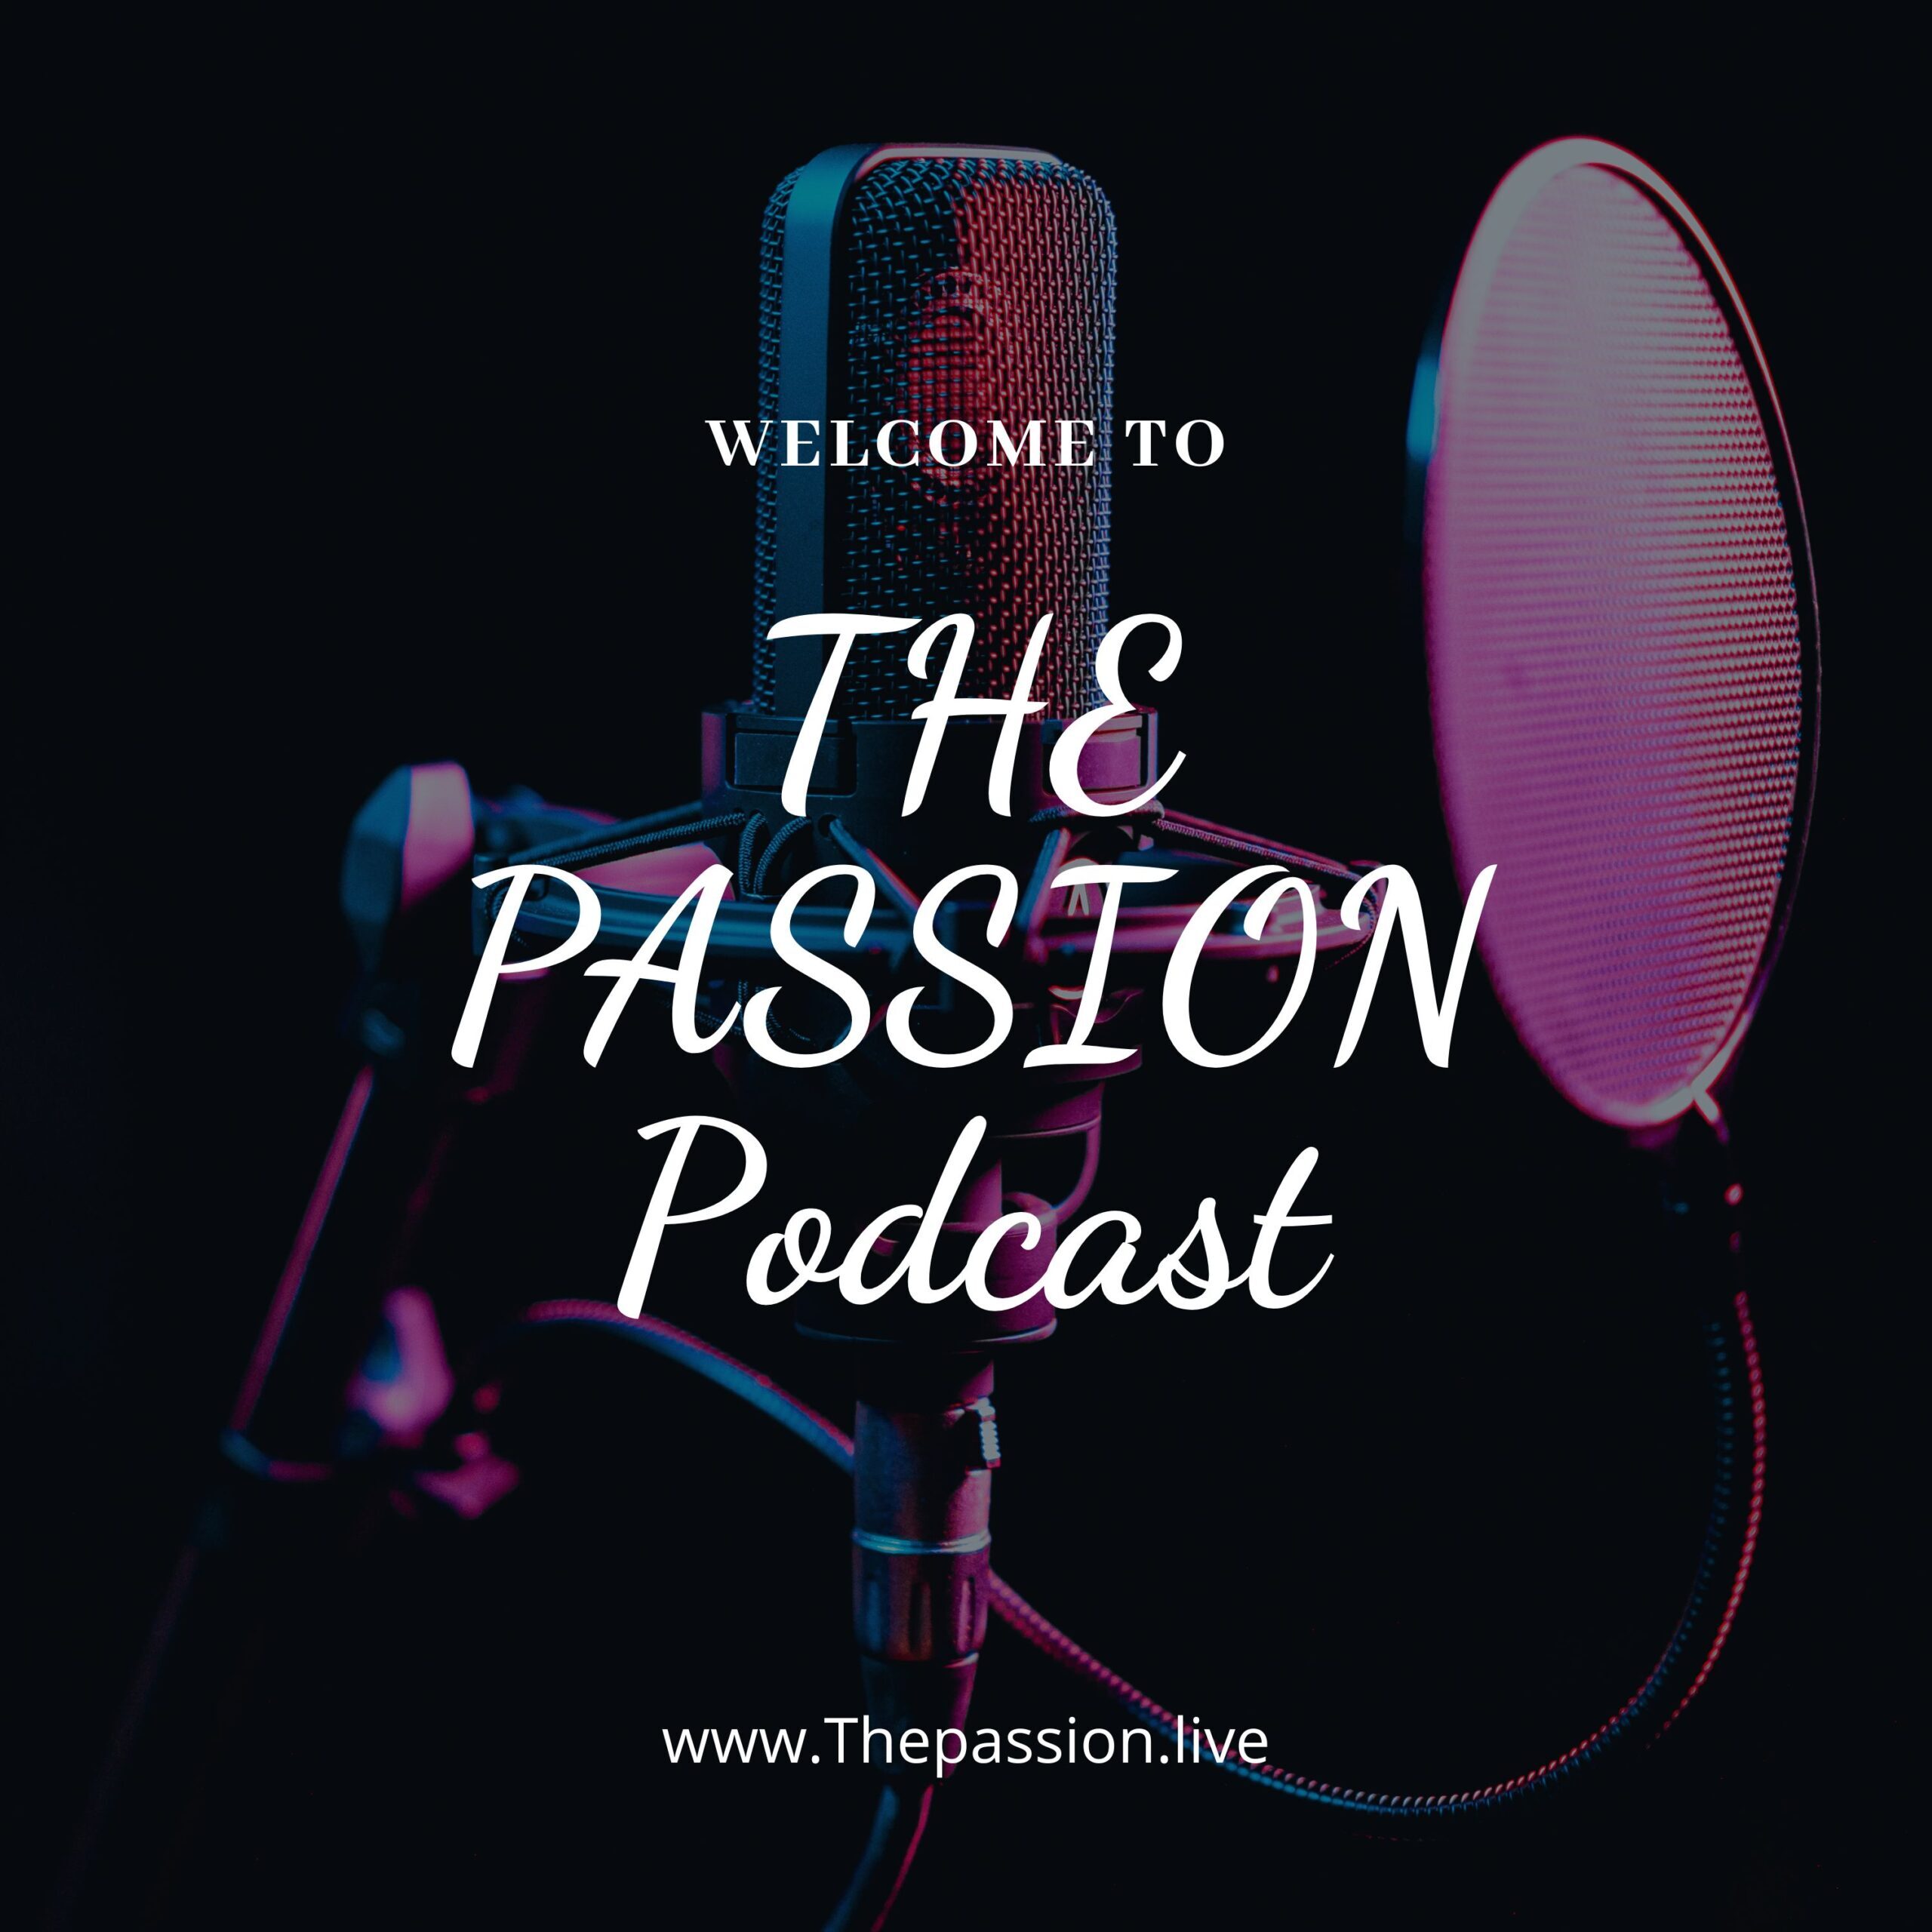 Wellcome to the Passion podcast